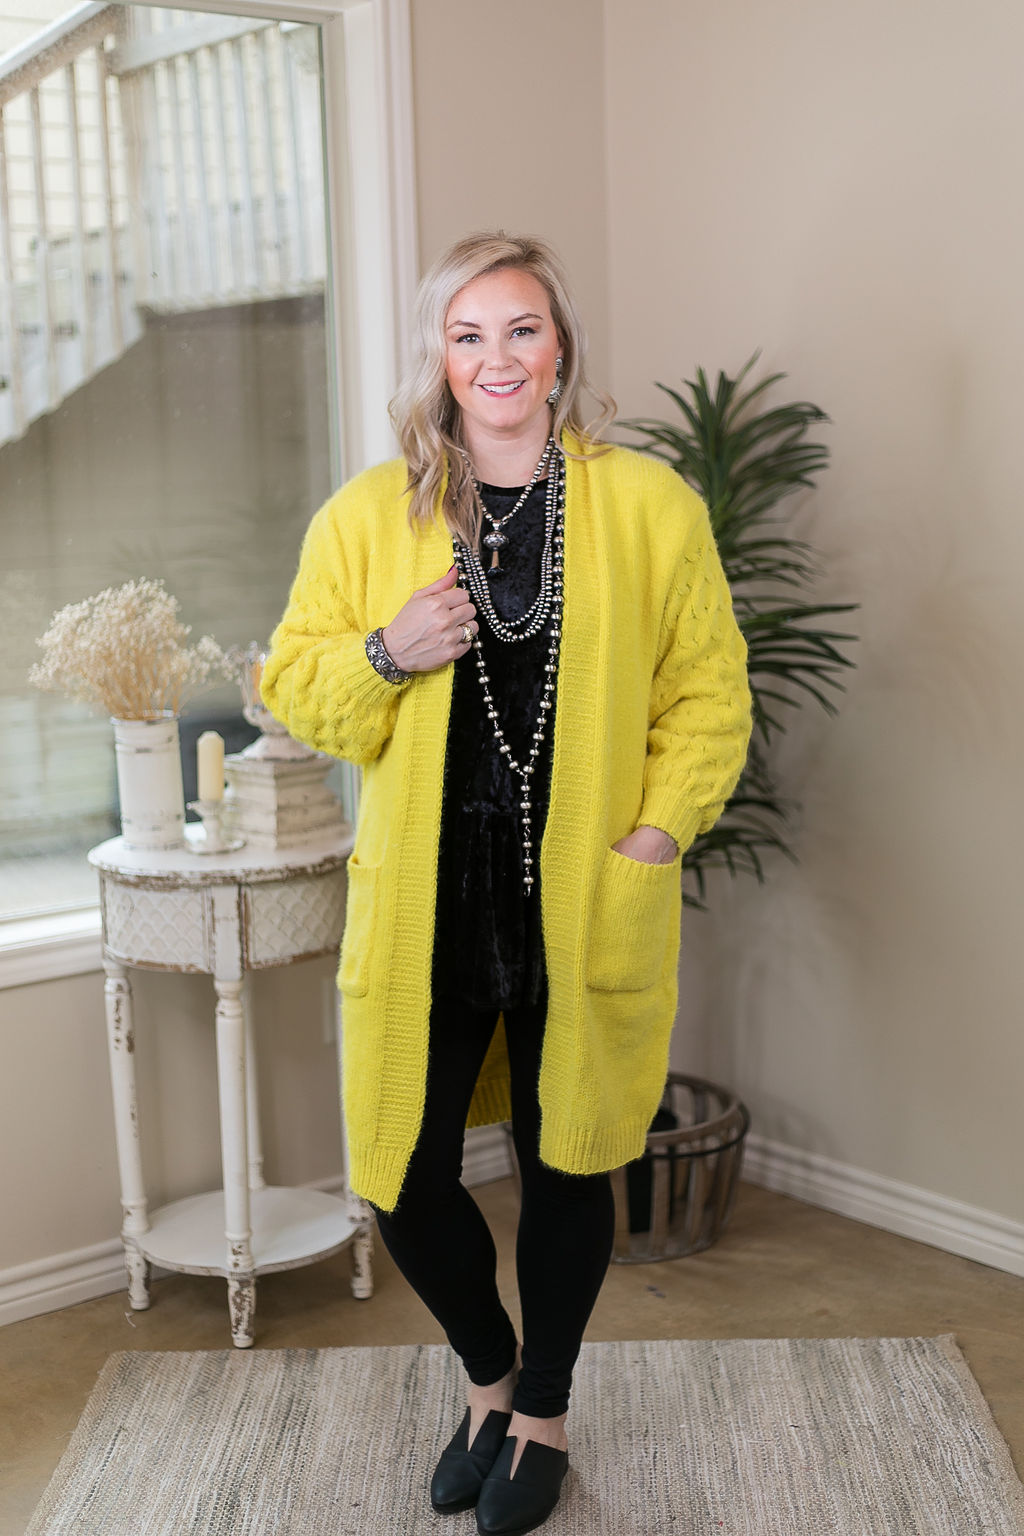 She's Dangerous Long Knit Cardigan with Braid Knitted Sleeves in Bright Yellow - Giddy Up Glamour Boutique